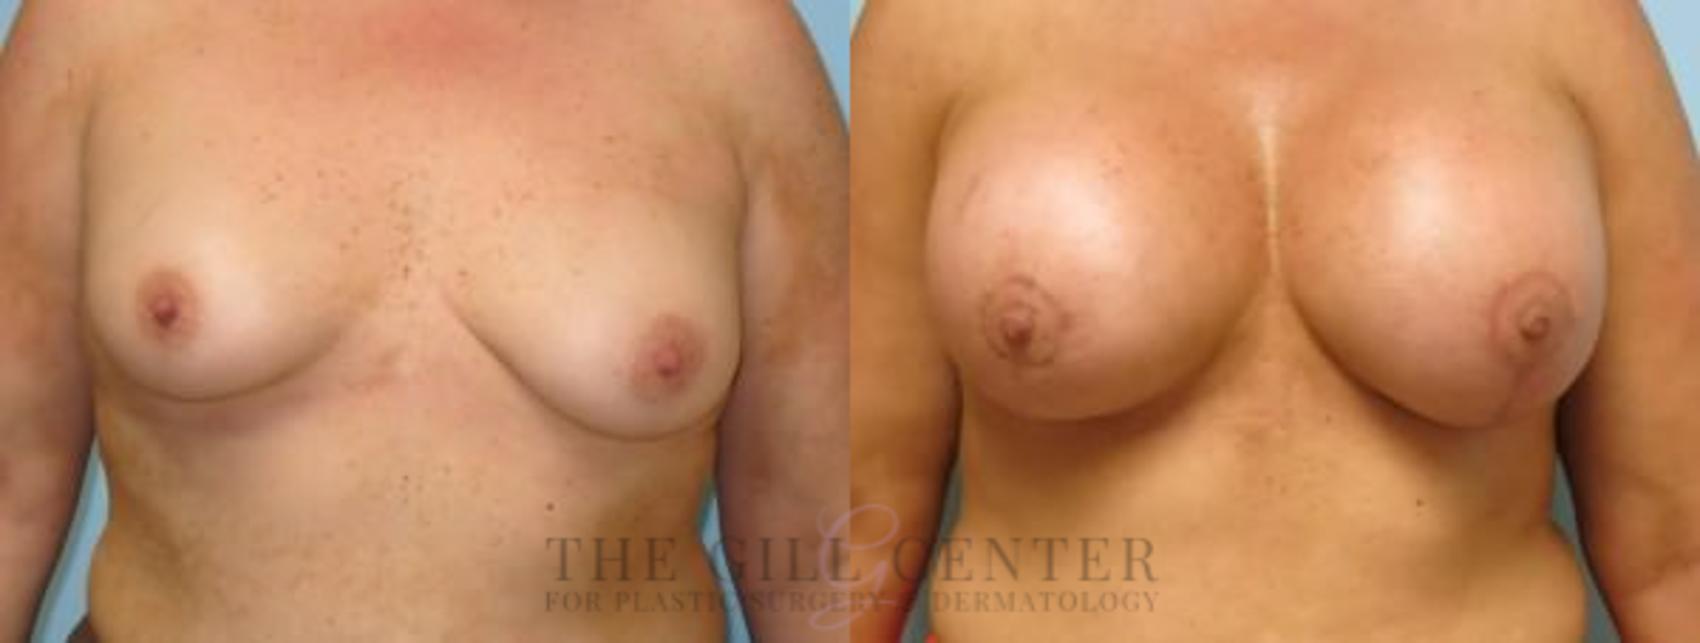 Breast Lift with Implants Case 109 Before & After Front | The Woodlands, TX | The Gill Center for Plastic Surgery and Dermatology